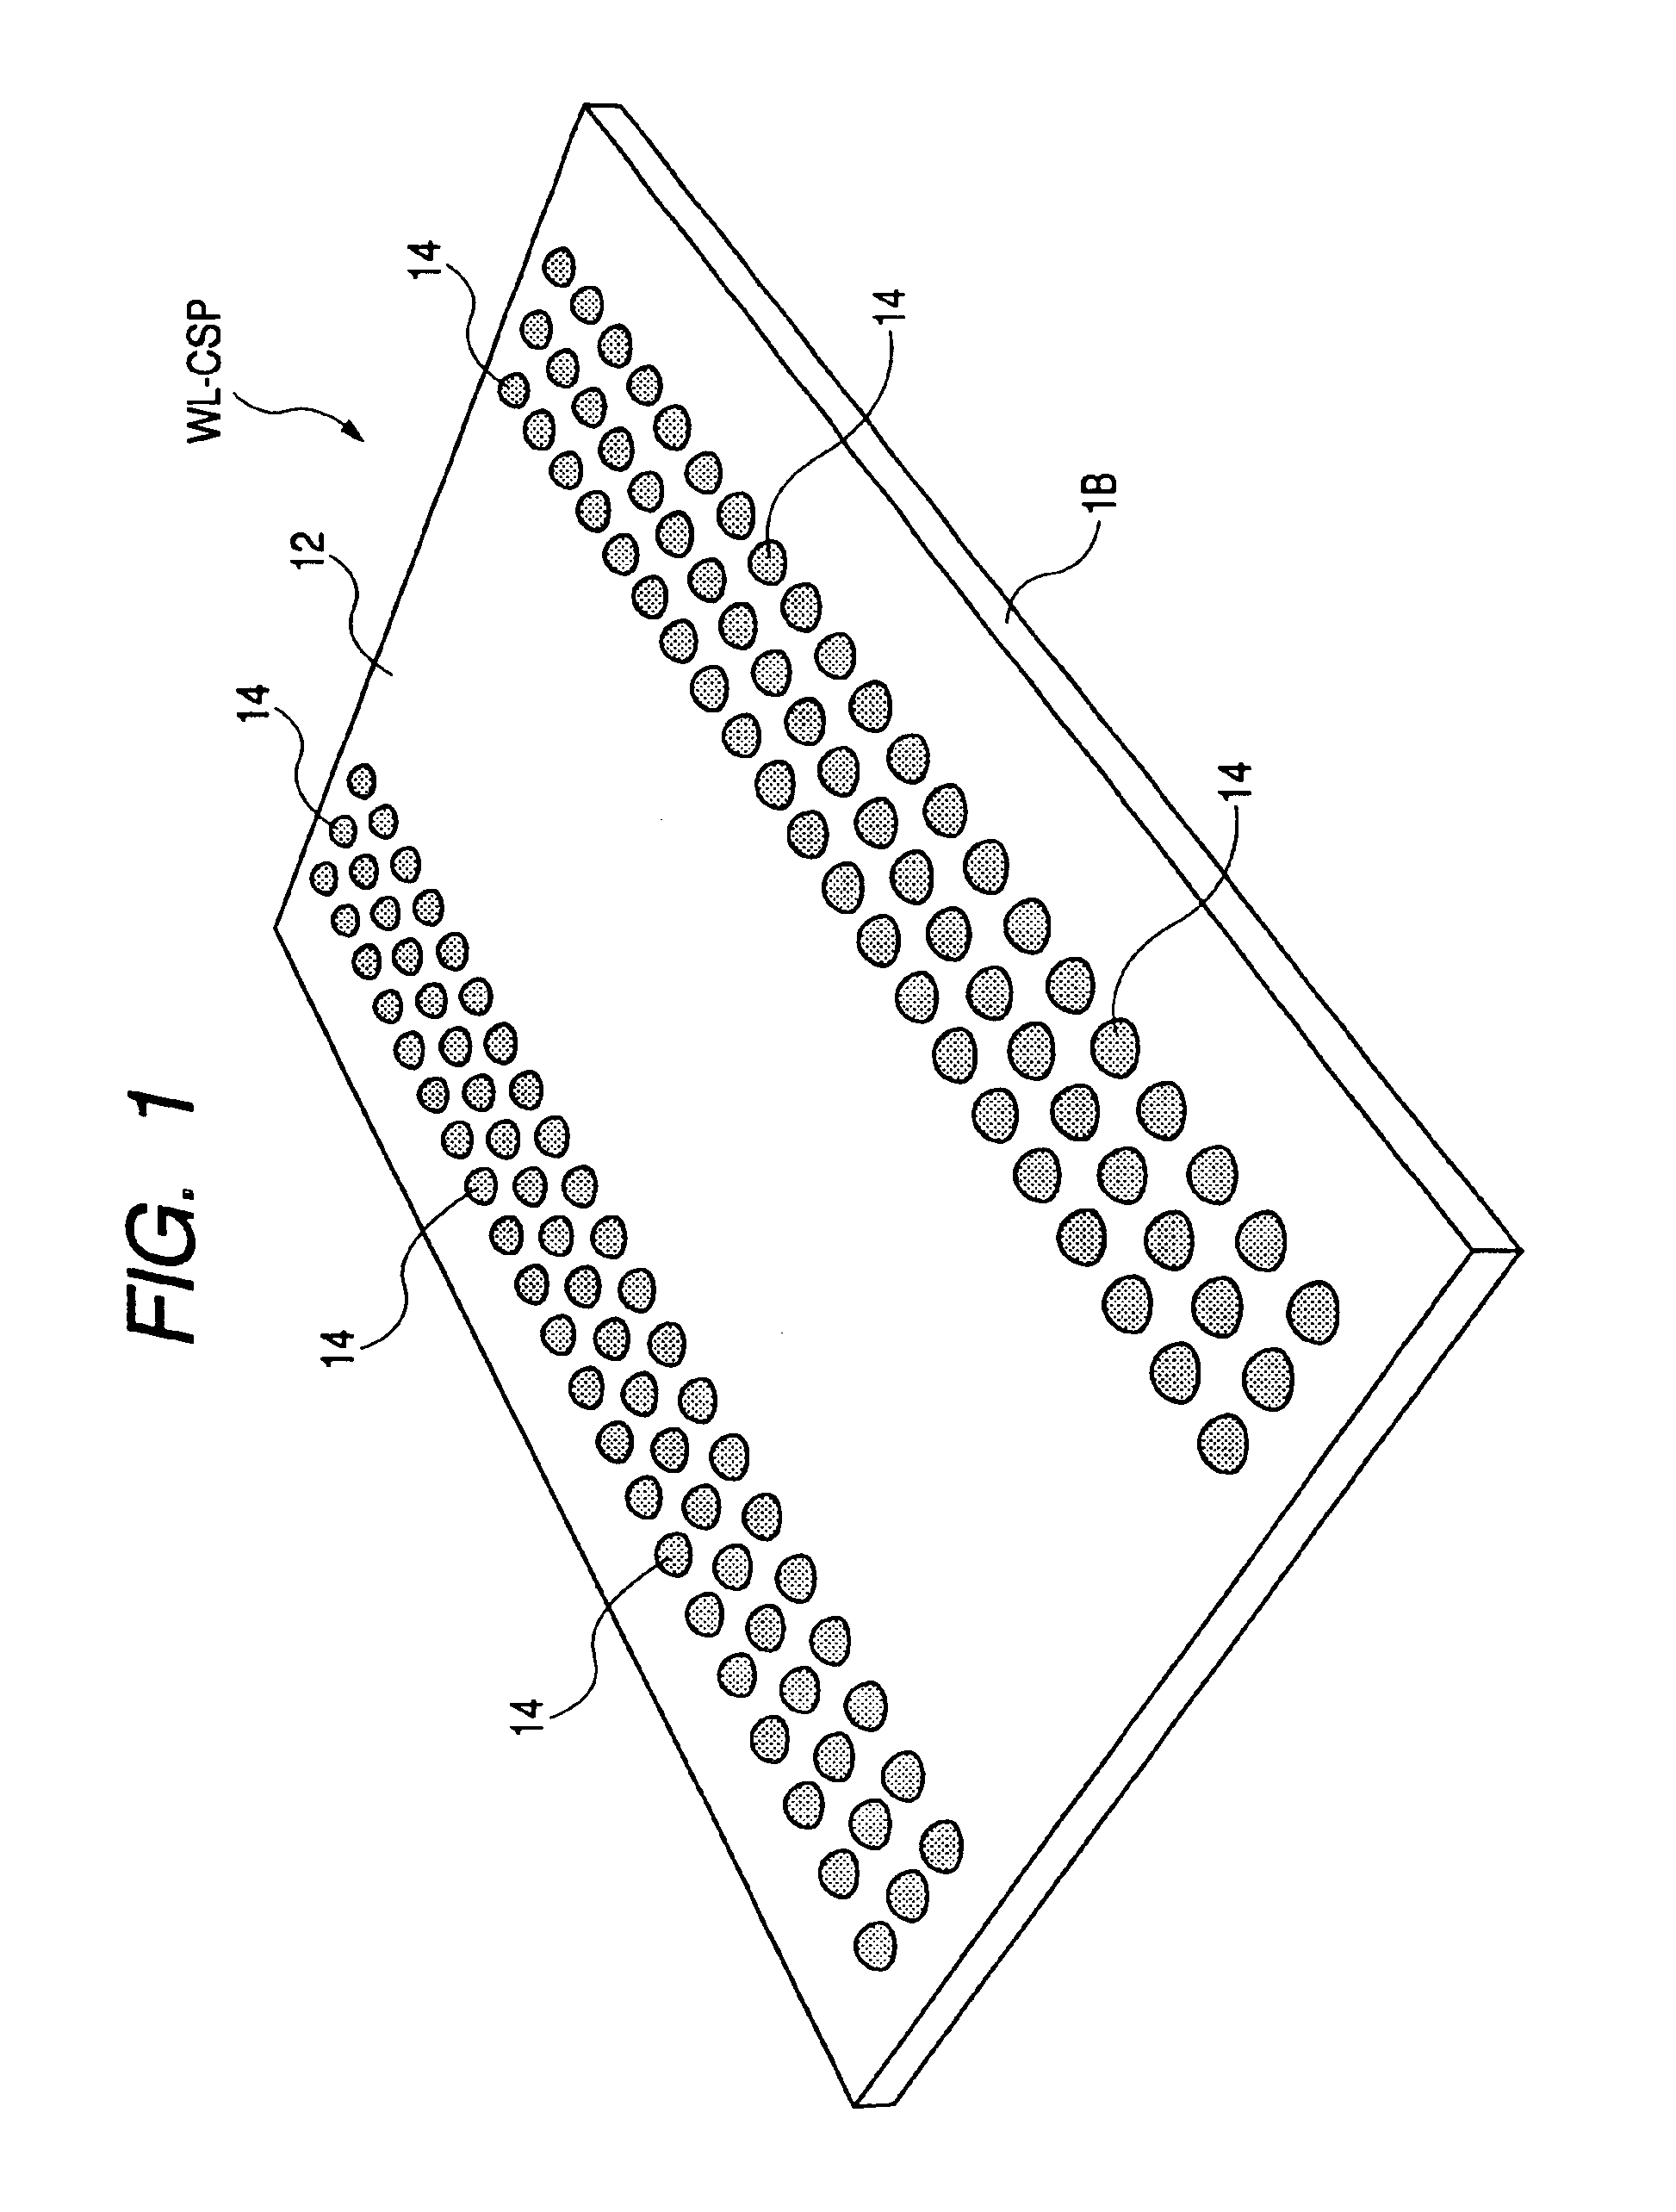 Semiconductor integrated circuit device and its manufacturing method